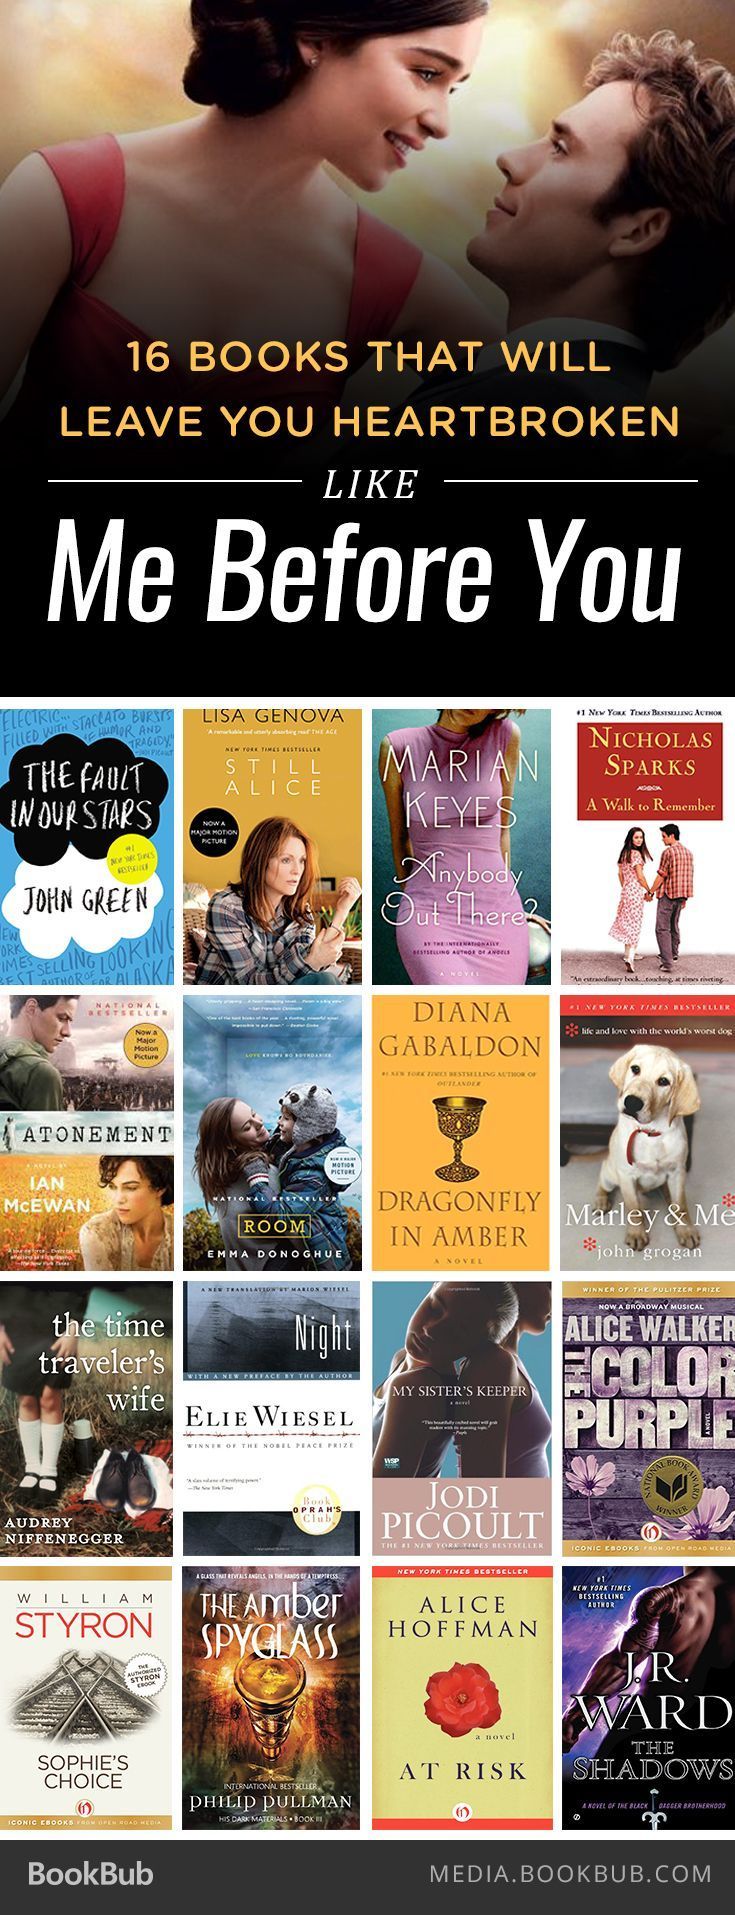 Grab the tissues! These 16 books will leave you heartbroken like Jojo Moyess Me Before You.